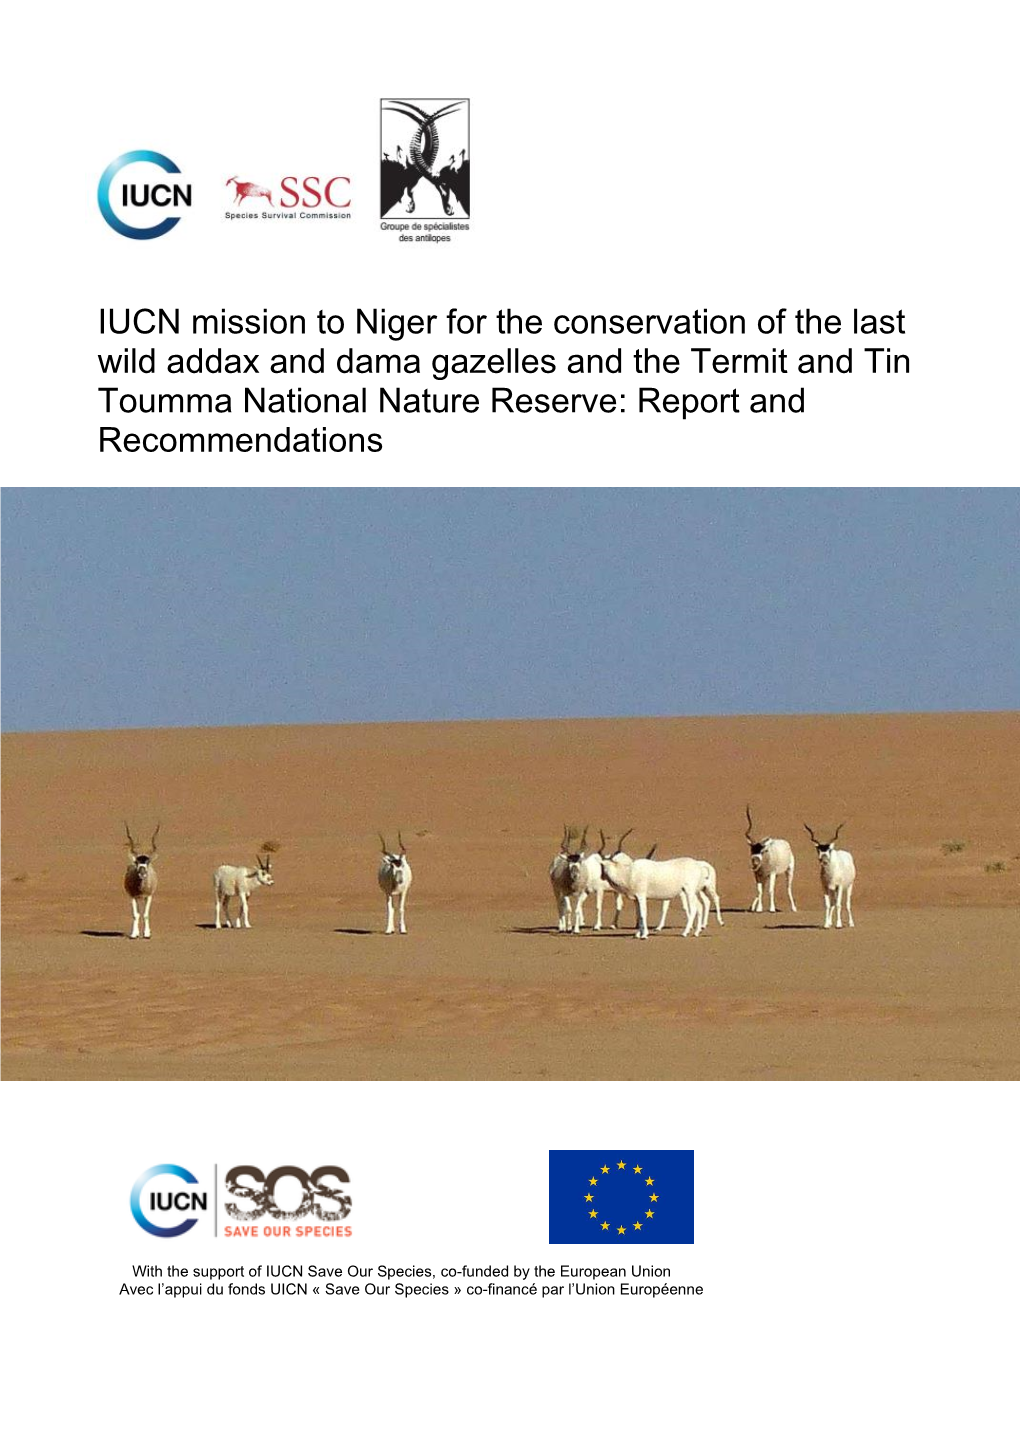 IUCN Mission to Niger for the Conservation of the Last Wild Addax and Dama Gazelles and the Termit and Tin Toumma National Nature Reserve: Report and Recommendations